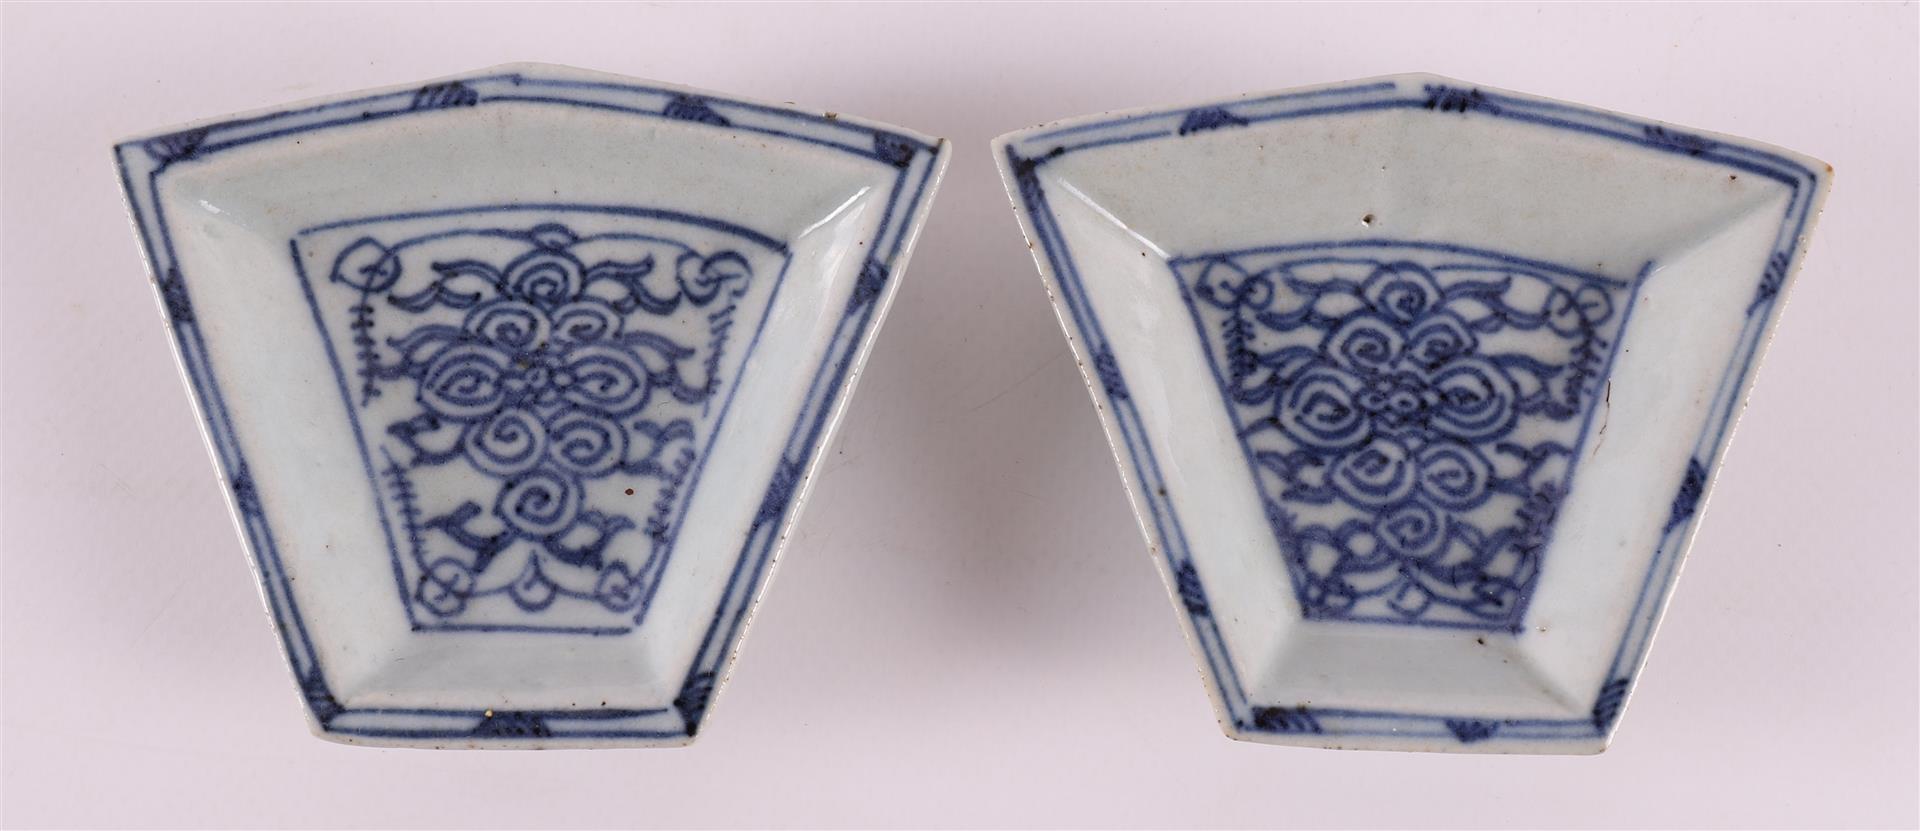 A blue and white porcelain hors d'oevre set, China, Kangxi, around 1700. - Image 9 of 12